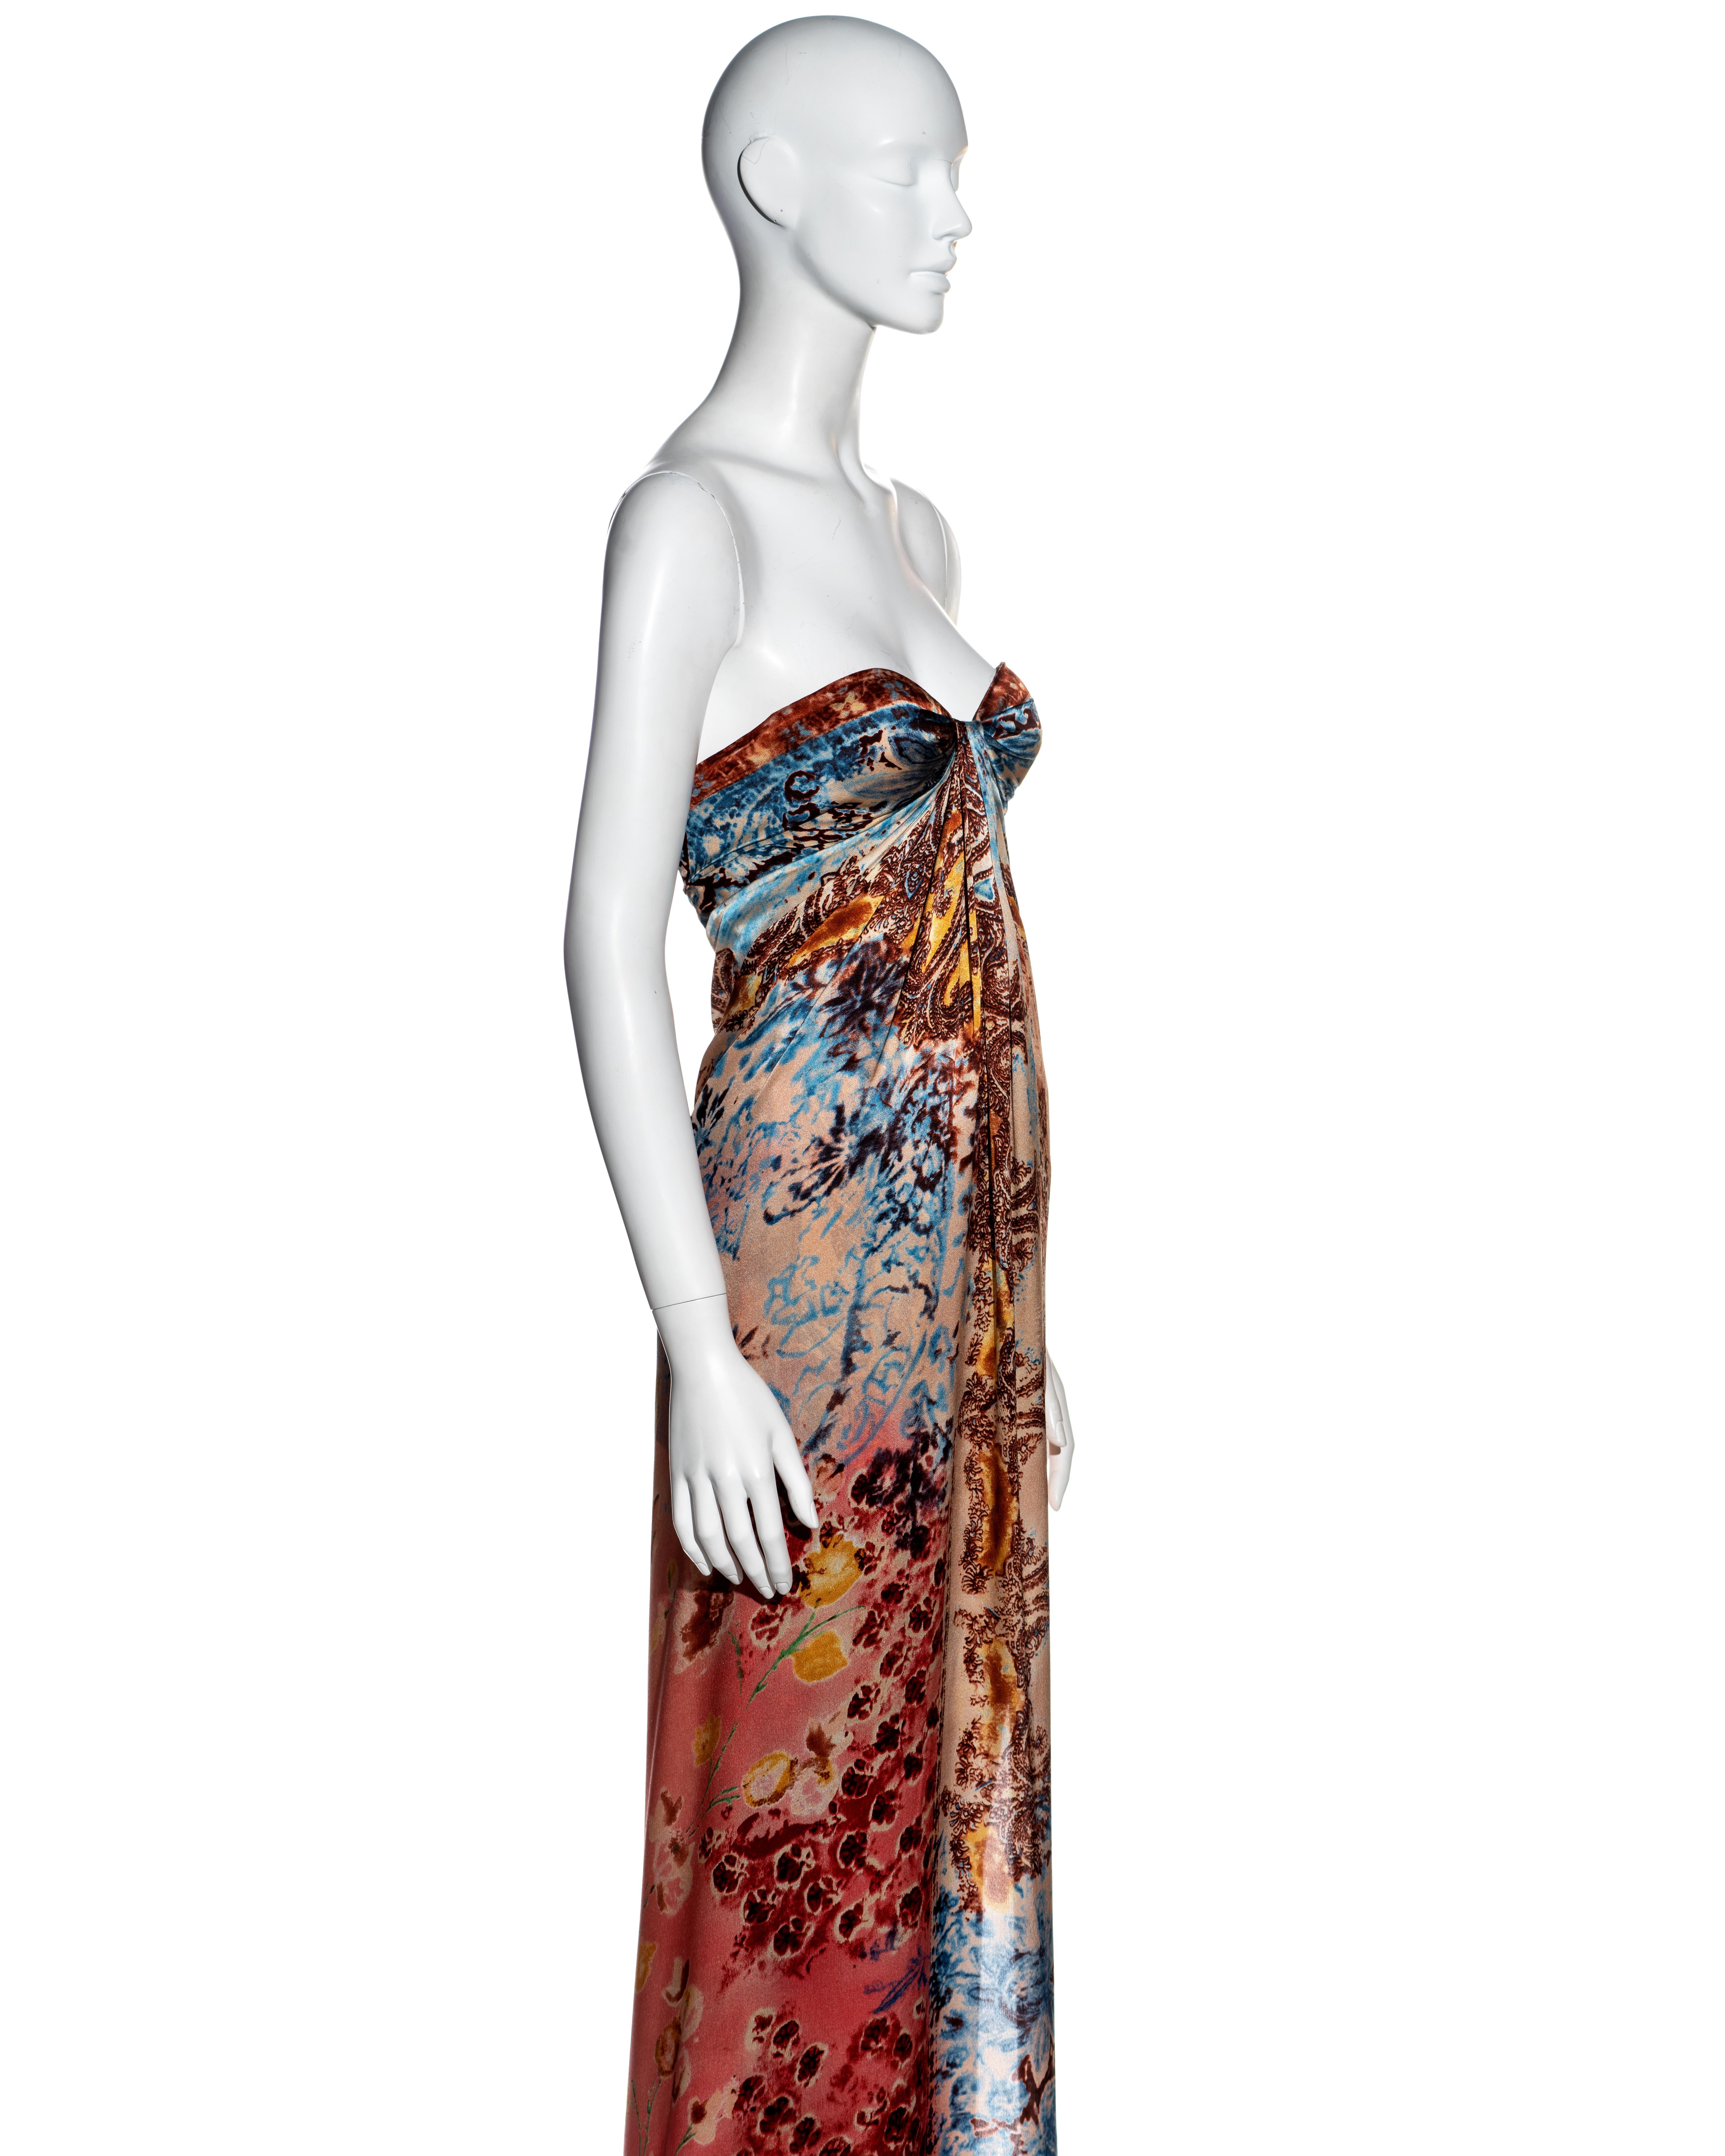 Emanuel Ungaro Couture silk strapless sarong style evening wrap dress, ss 2002 1